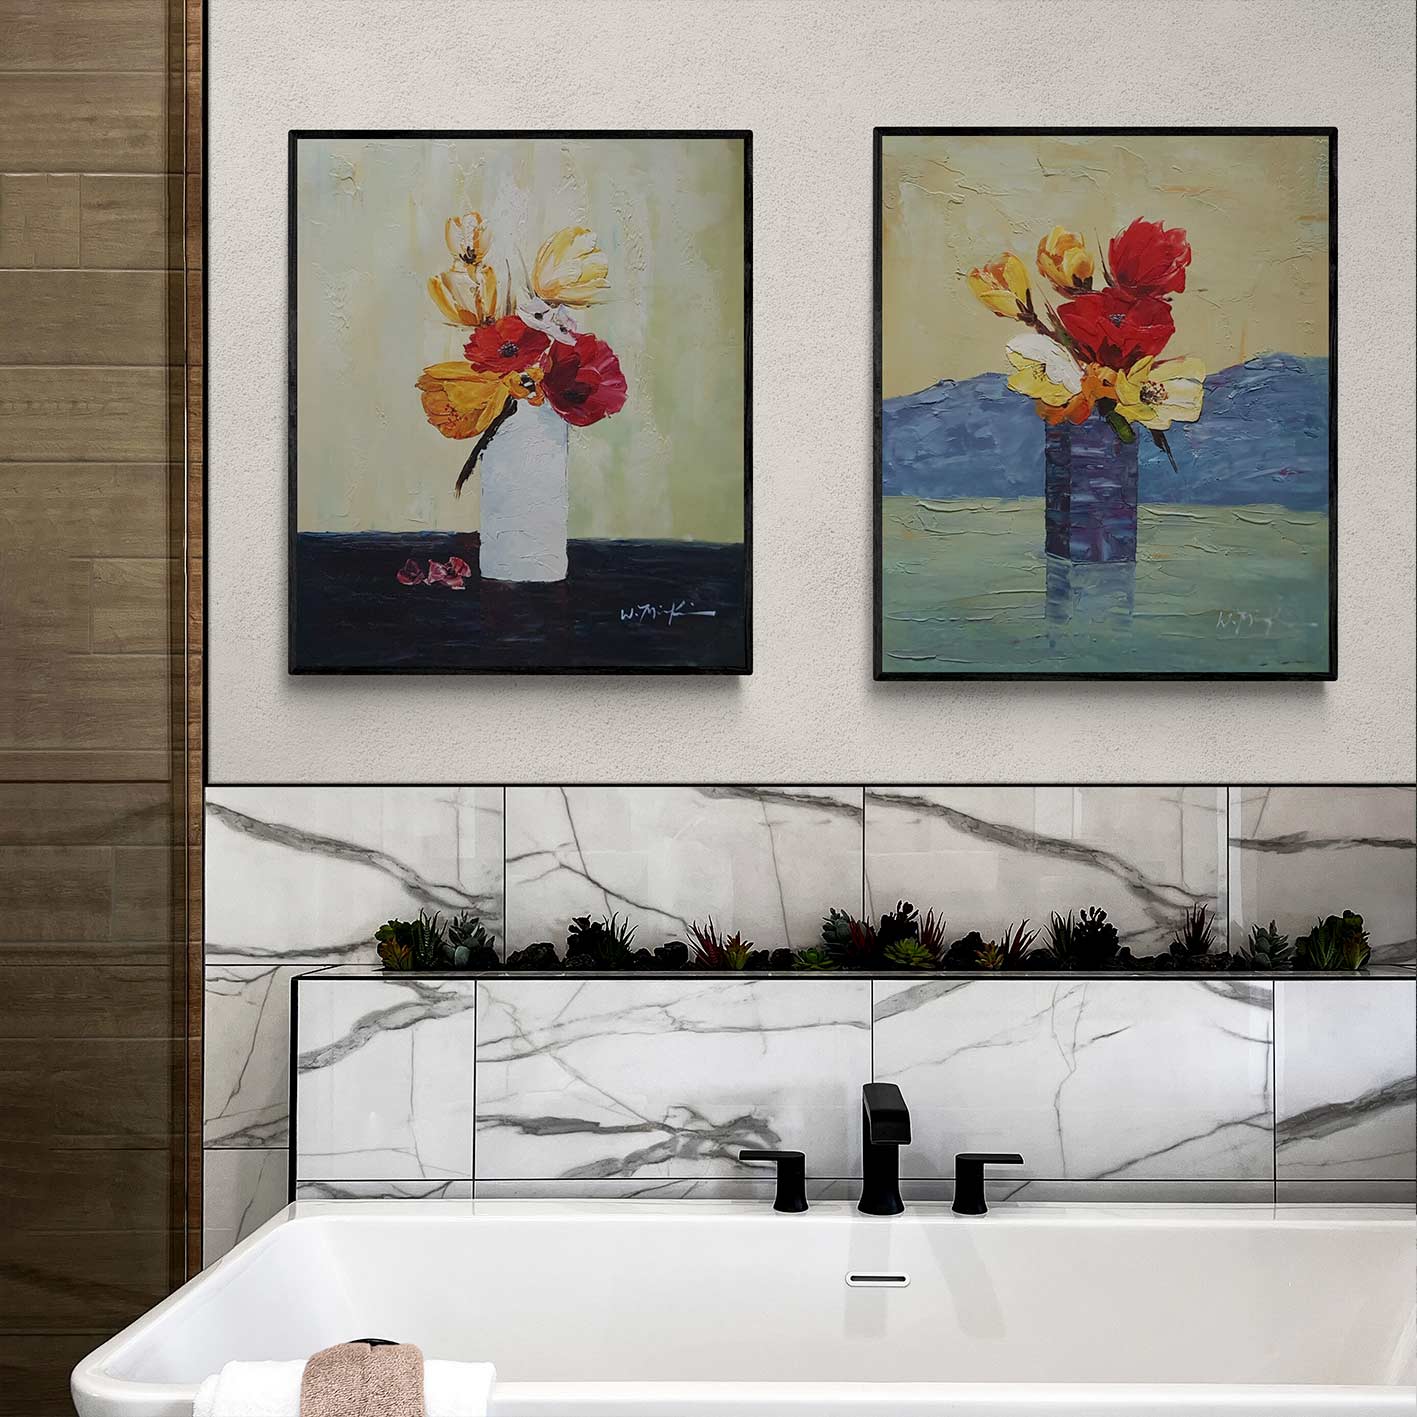 Expansion Flowers Diptych Painting 60x50 cm [2 pieces]